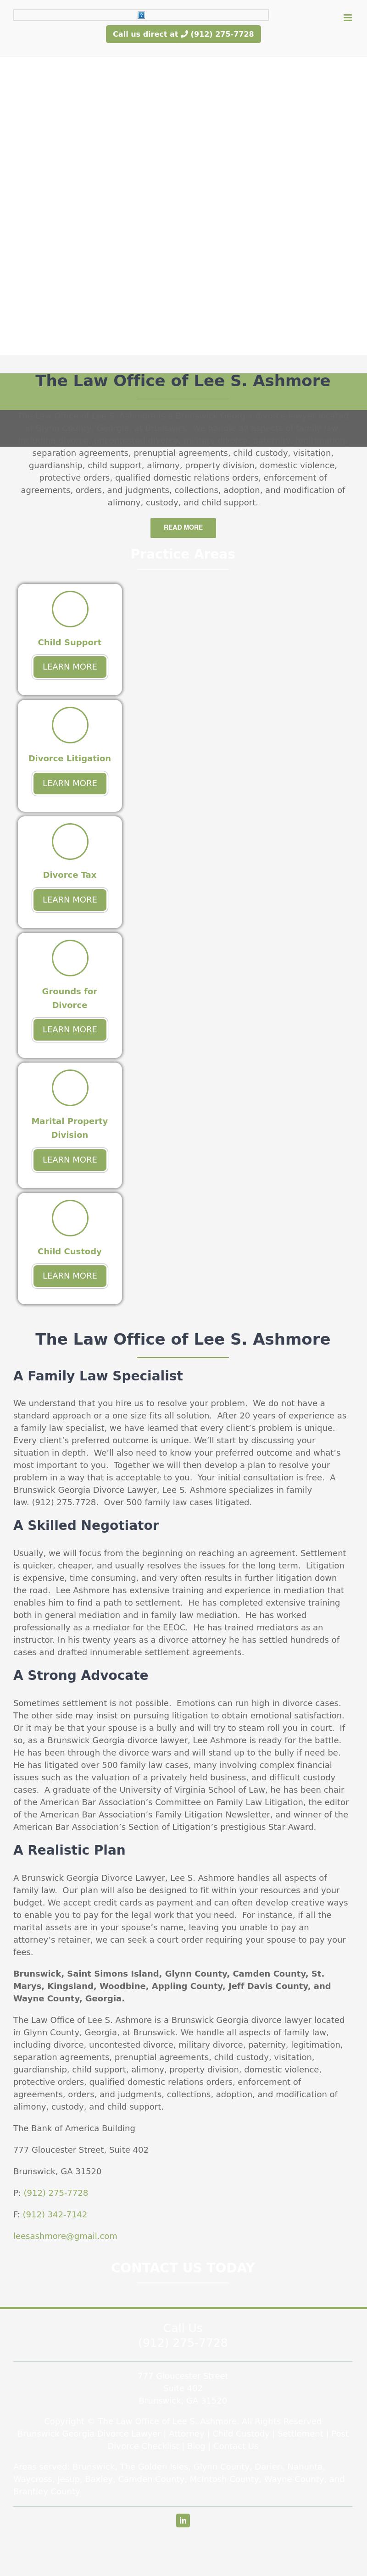 The Law Office of Lee S. Ashmore - Brunswick GA Lawyers